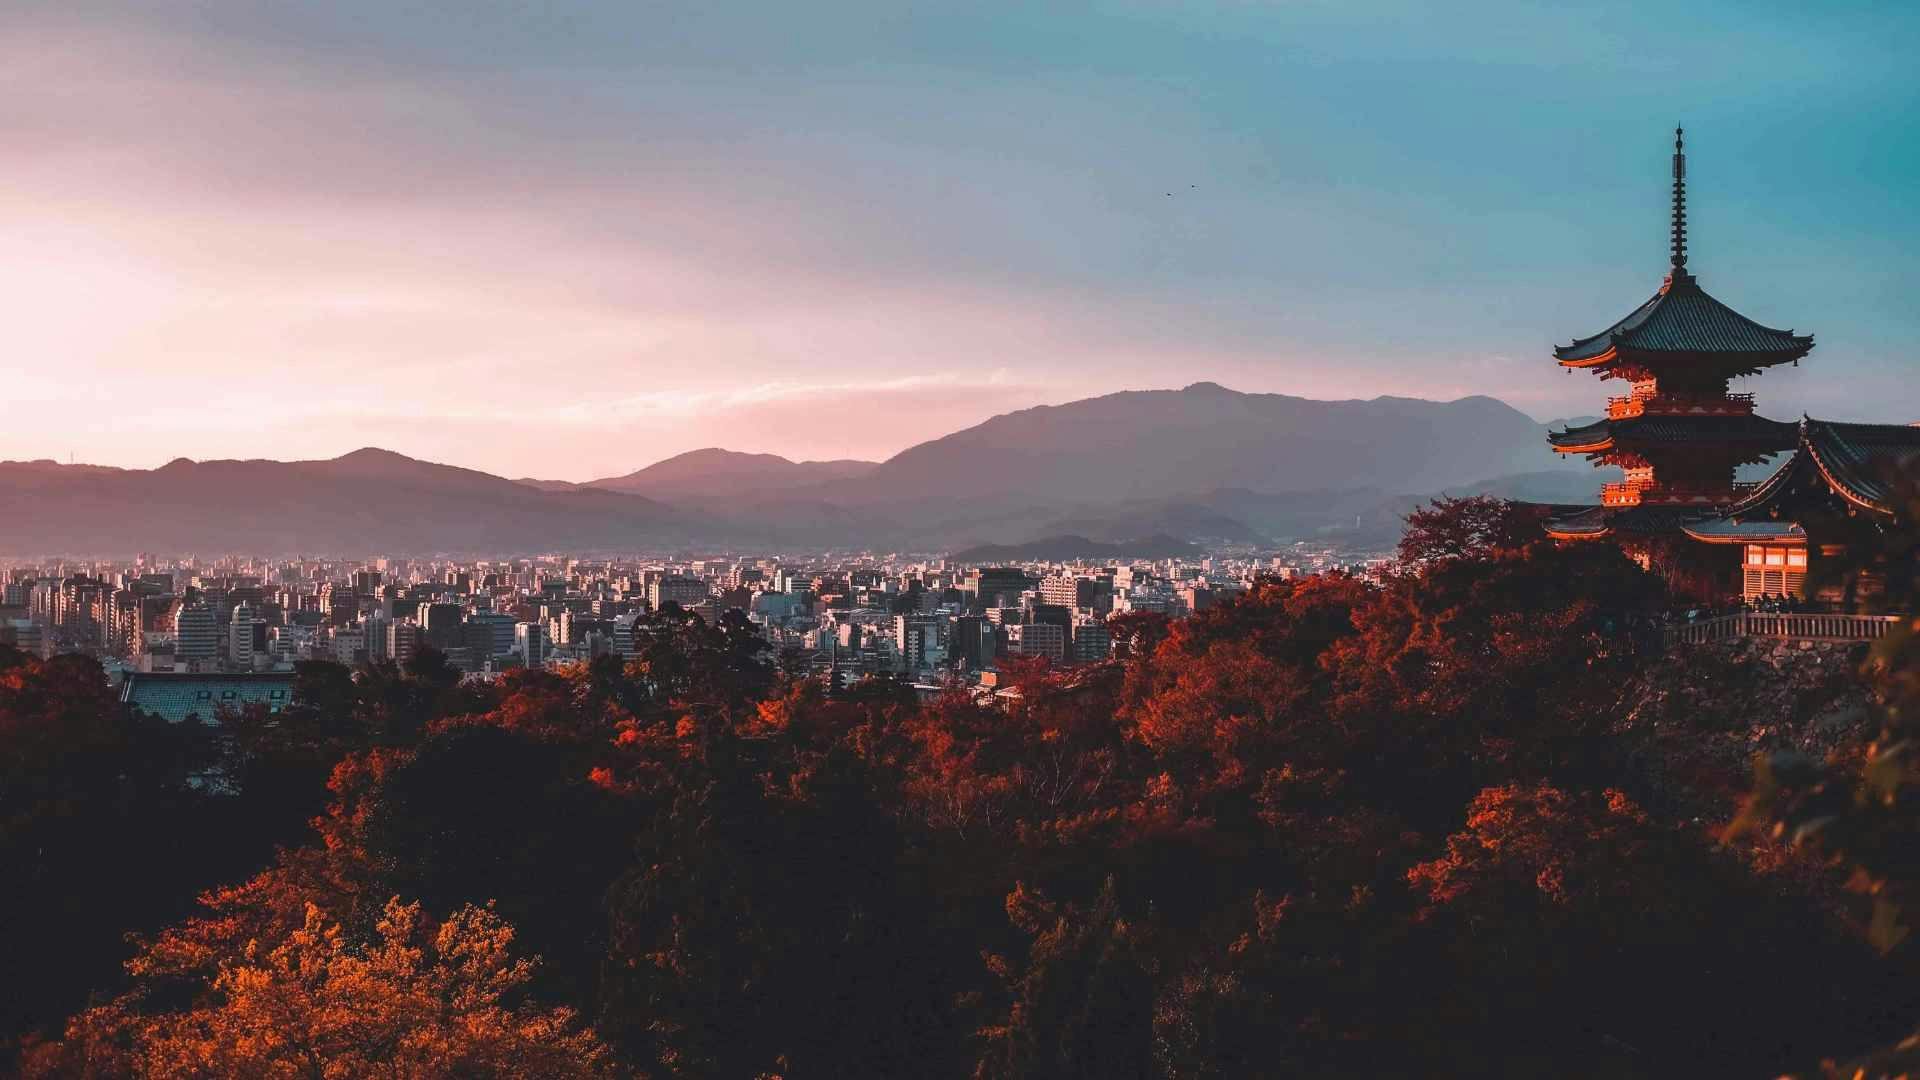 Image of Japanese Landscape, mountains, buildings